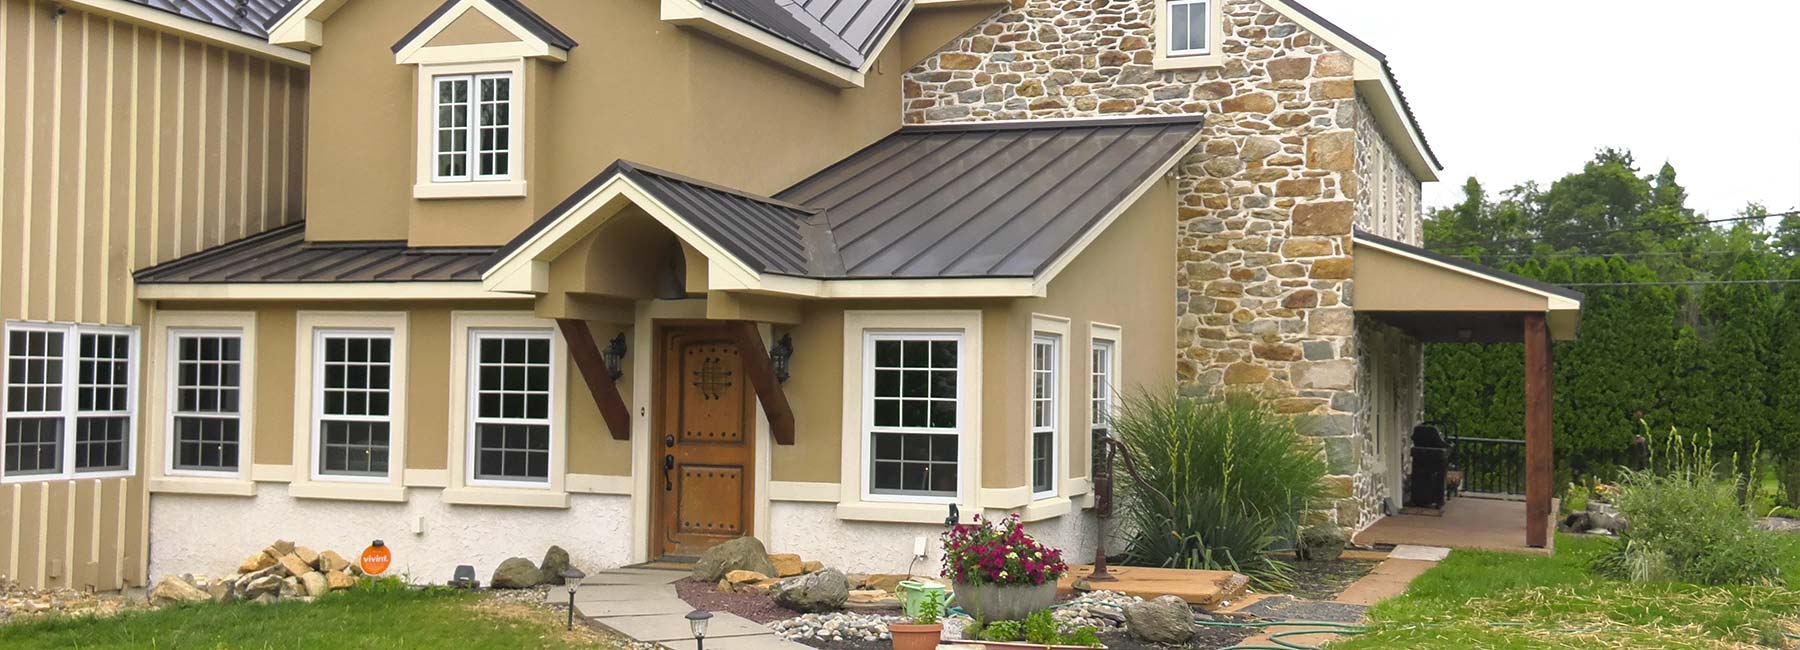 Stucco Repair Contractors in Lehigh County, PA lehigh county